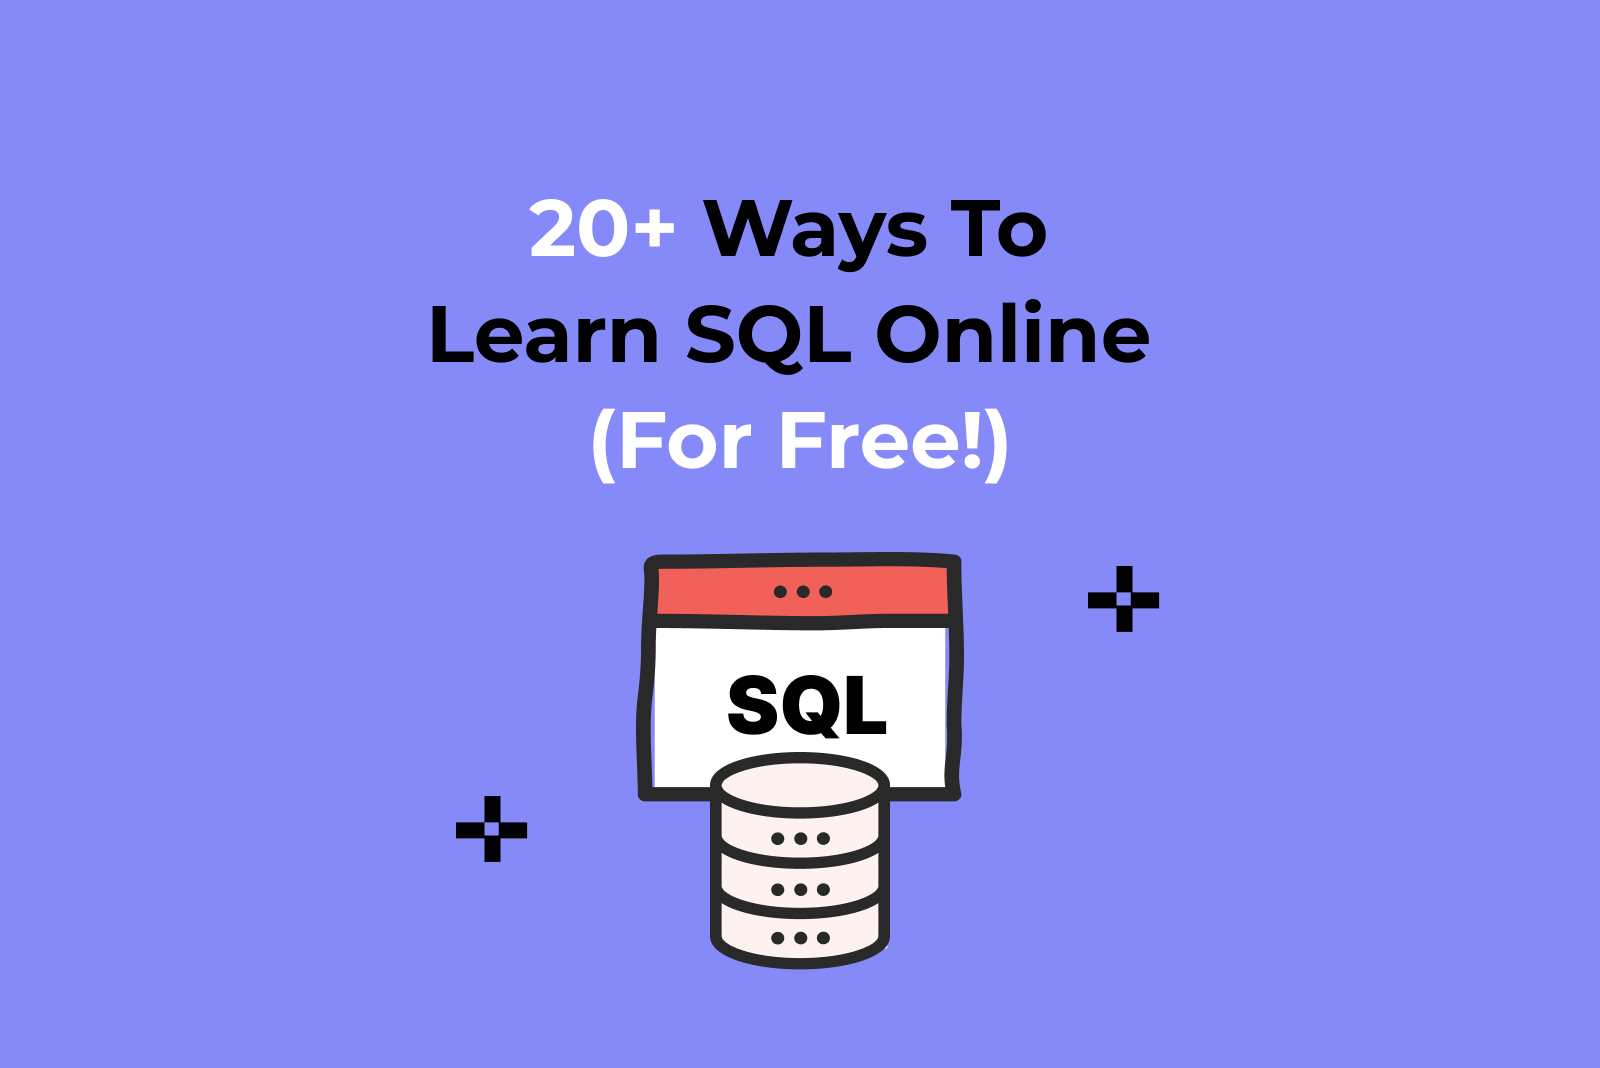 20 plus ways to learn SQL online (for free!)